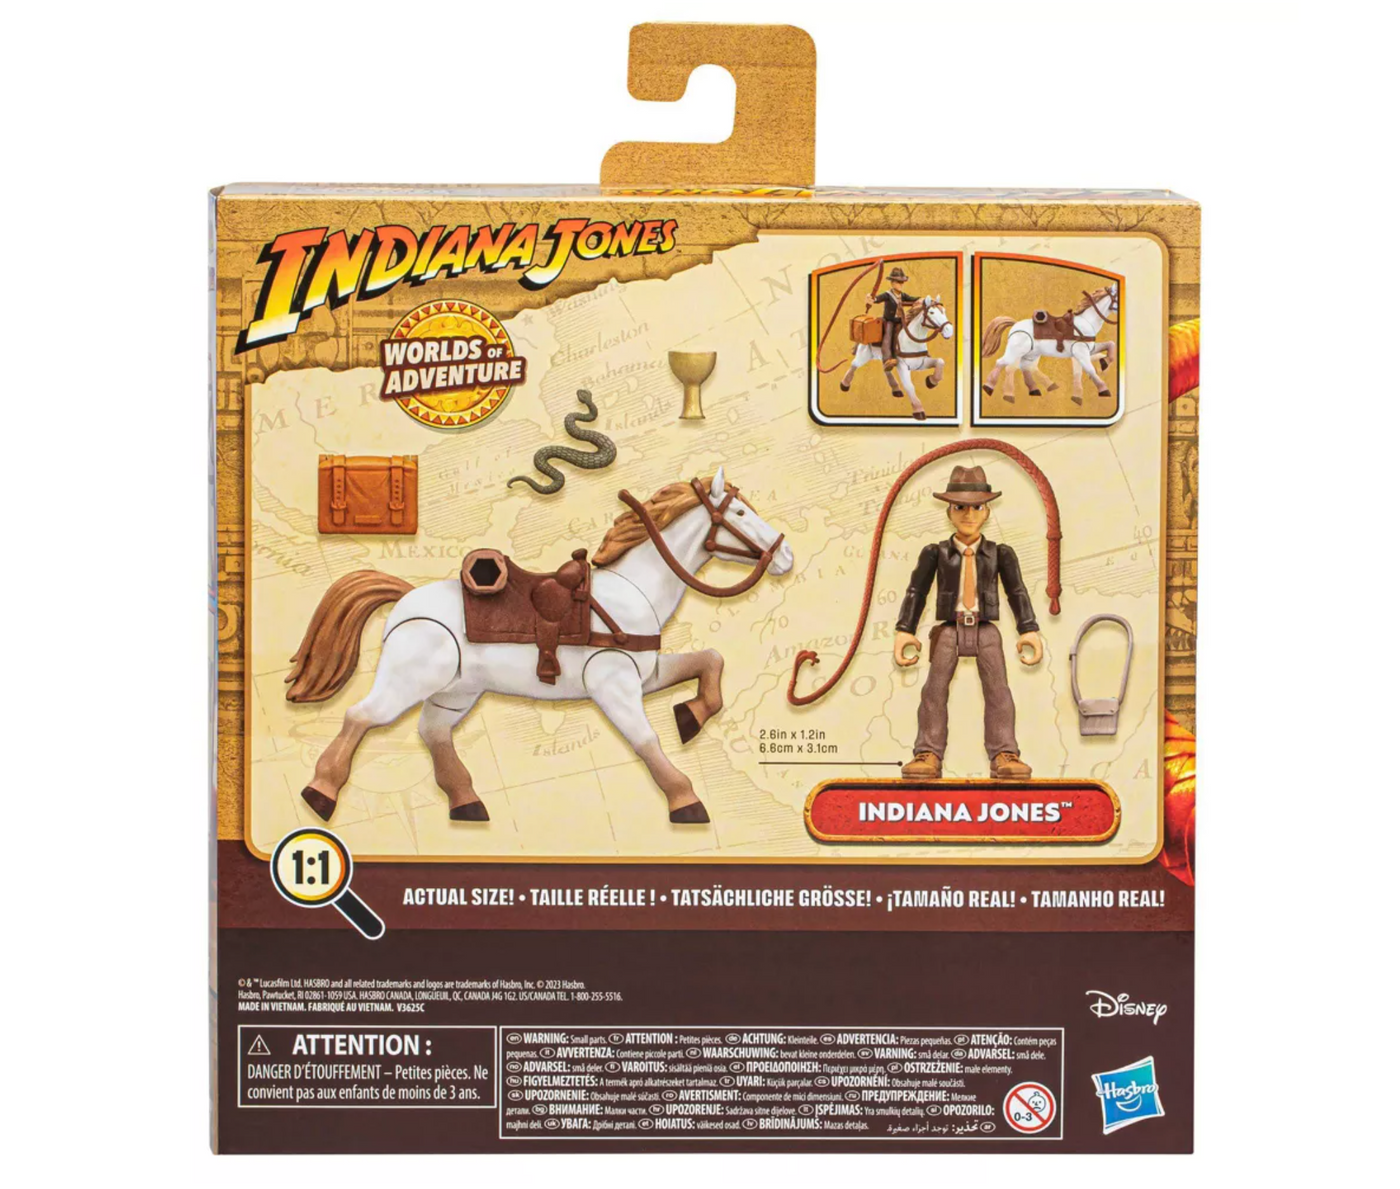 Disney Indiana Jones Worlds of Adventure Action Figure with Horse New with Box